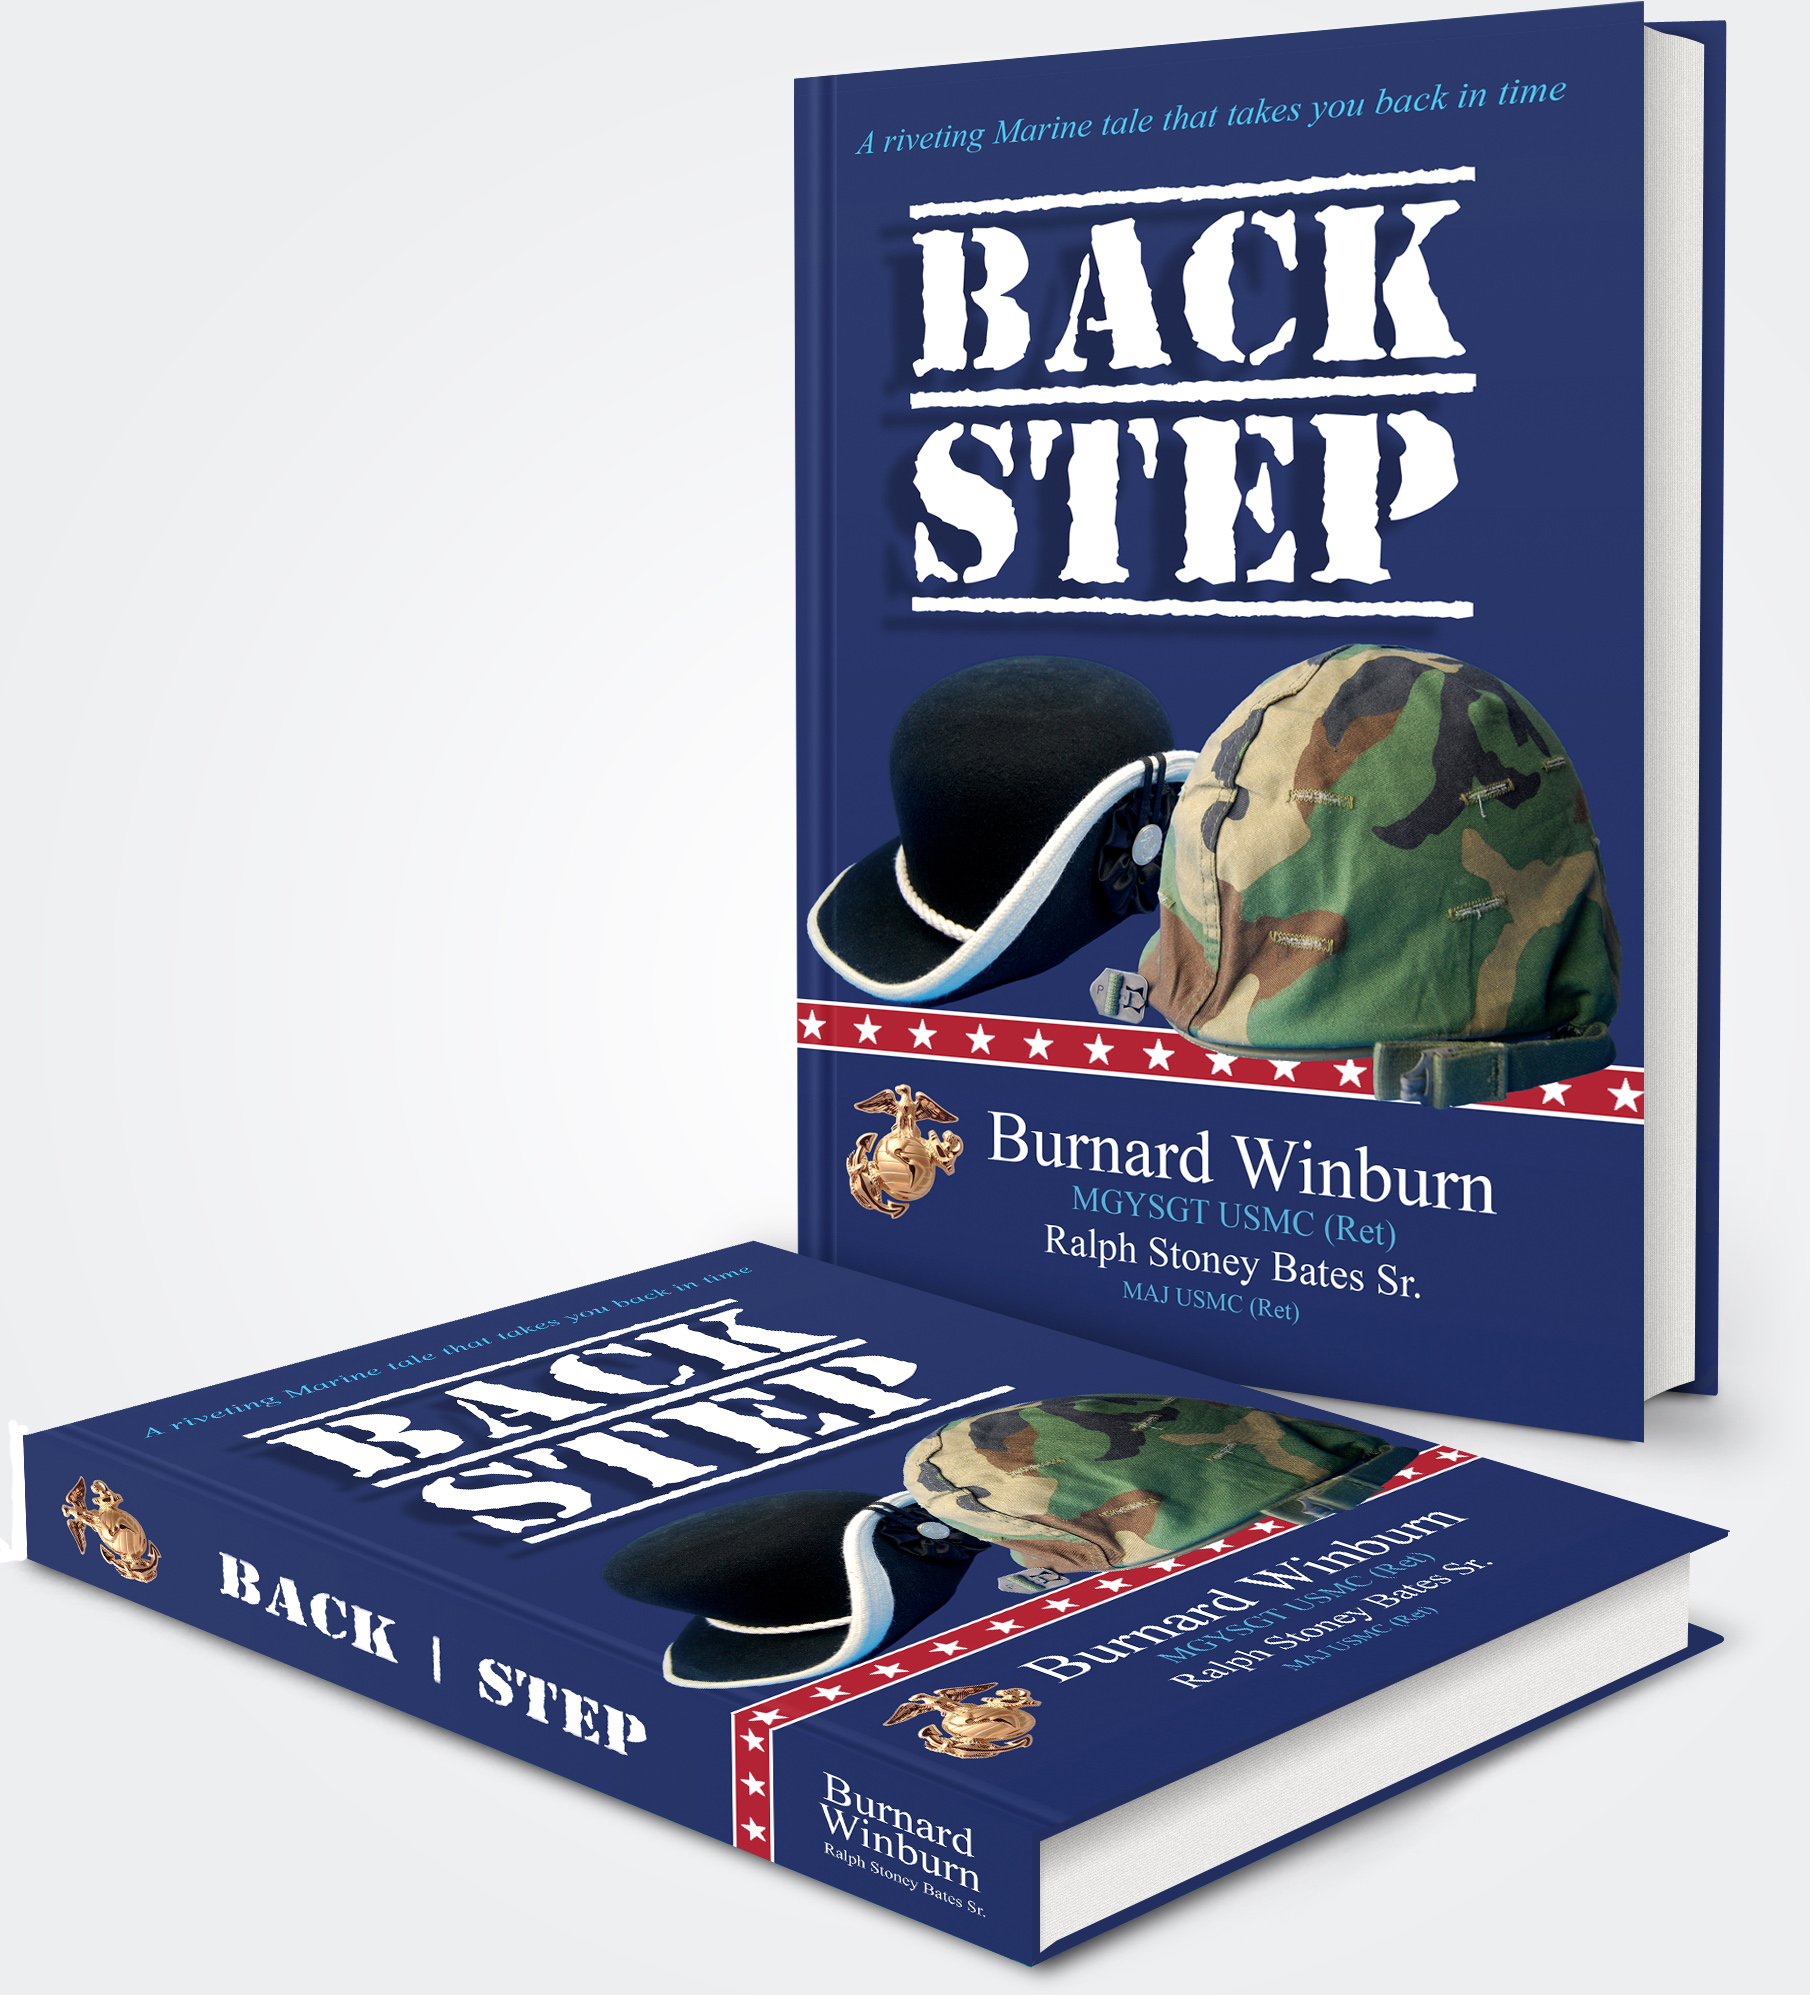 Back Step Book Covers